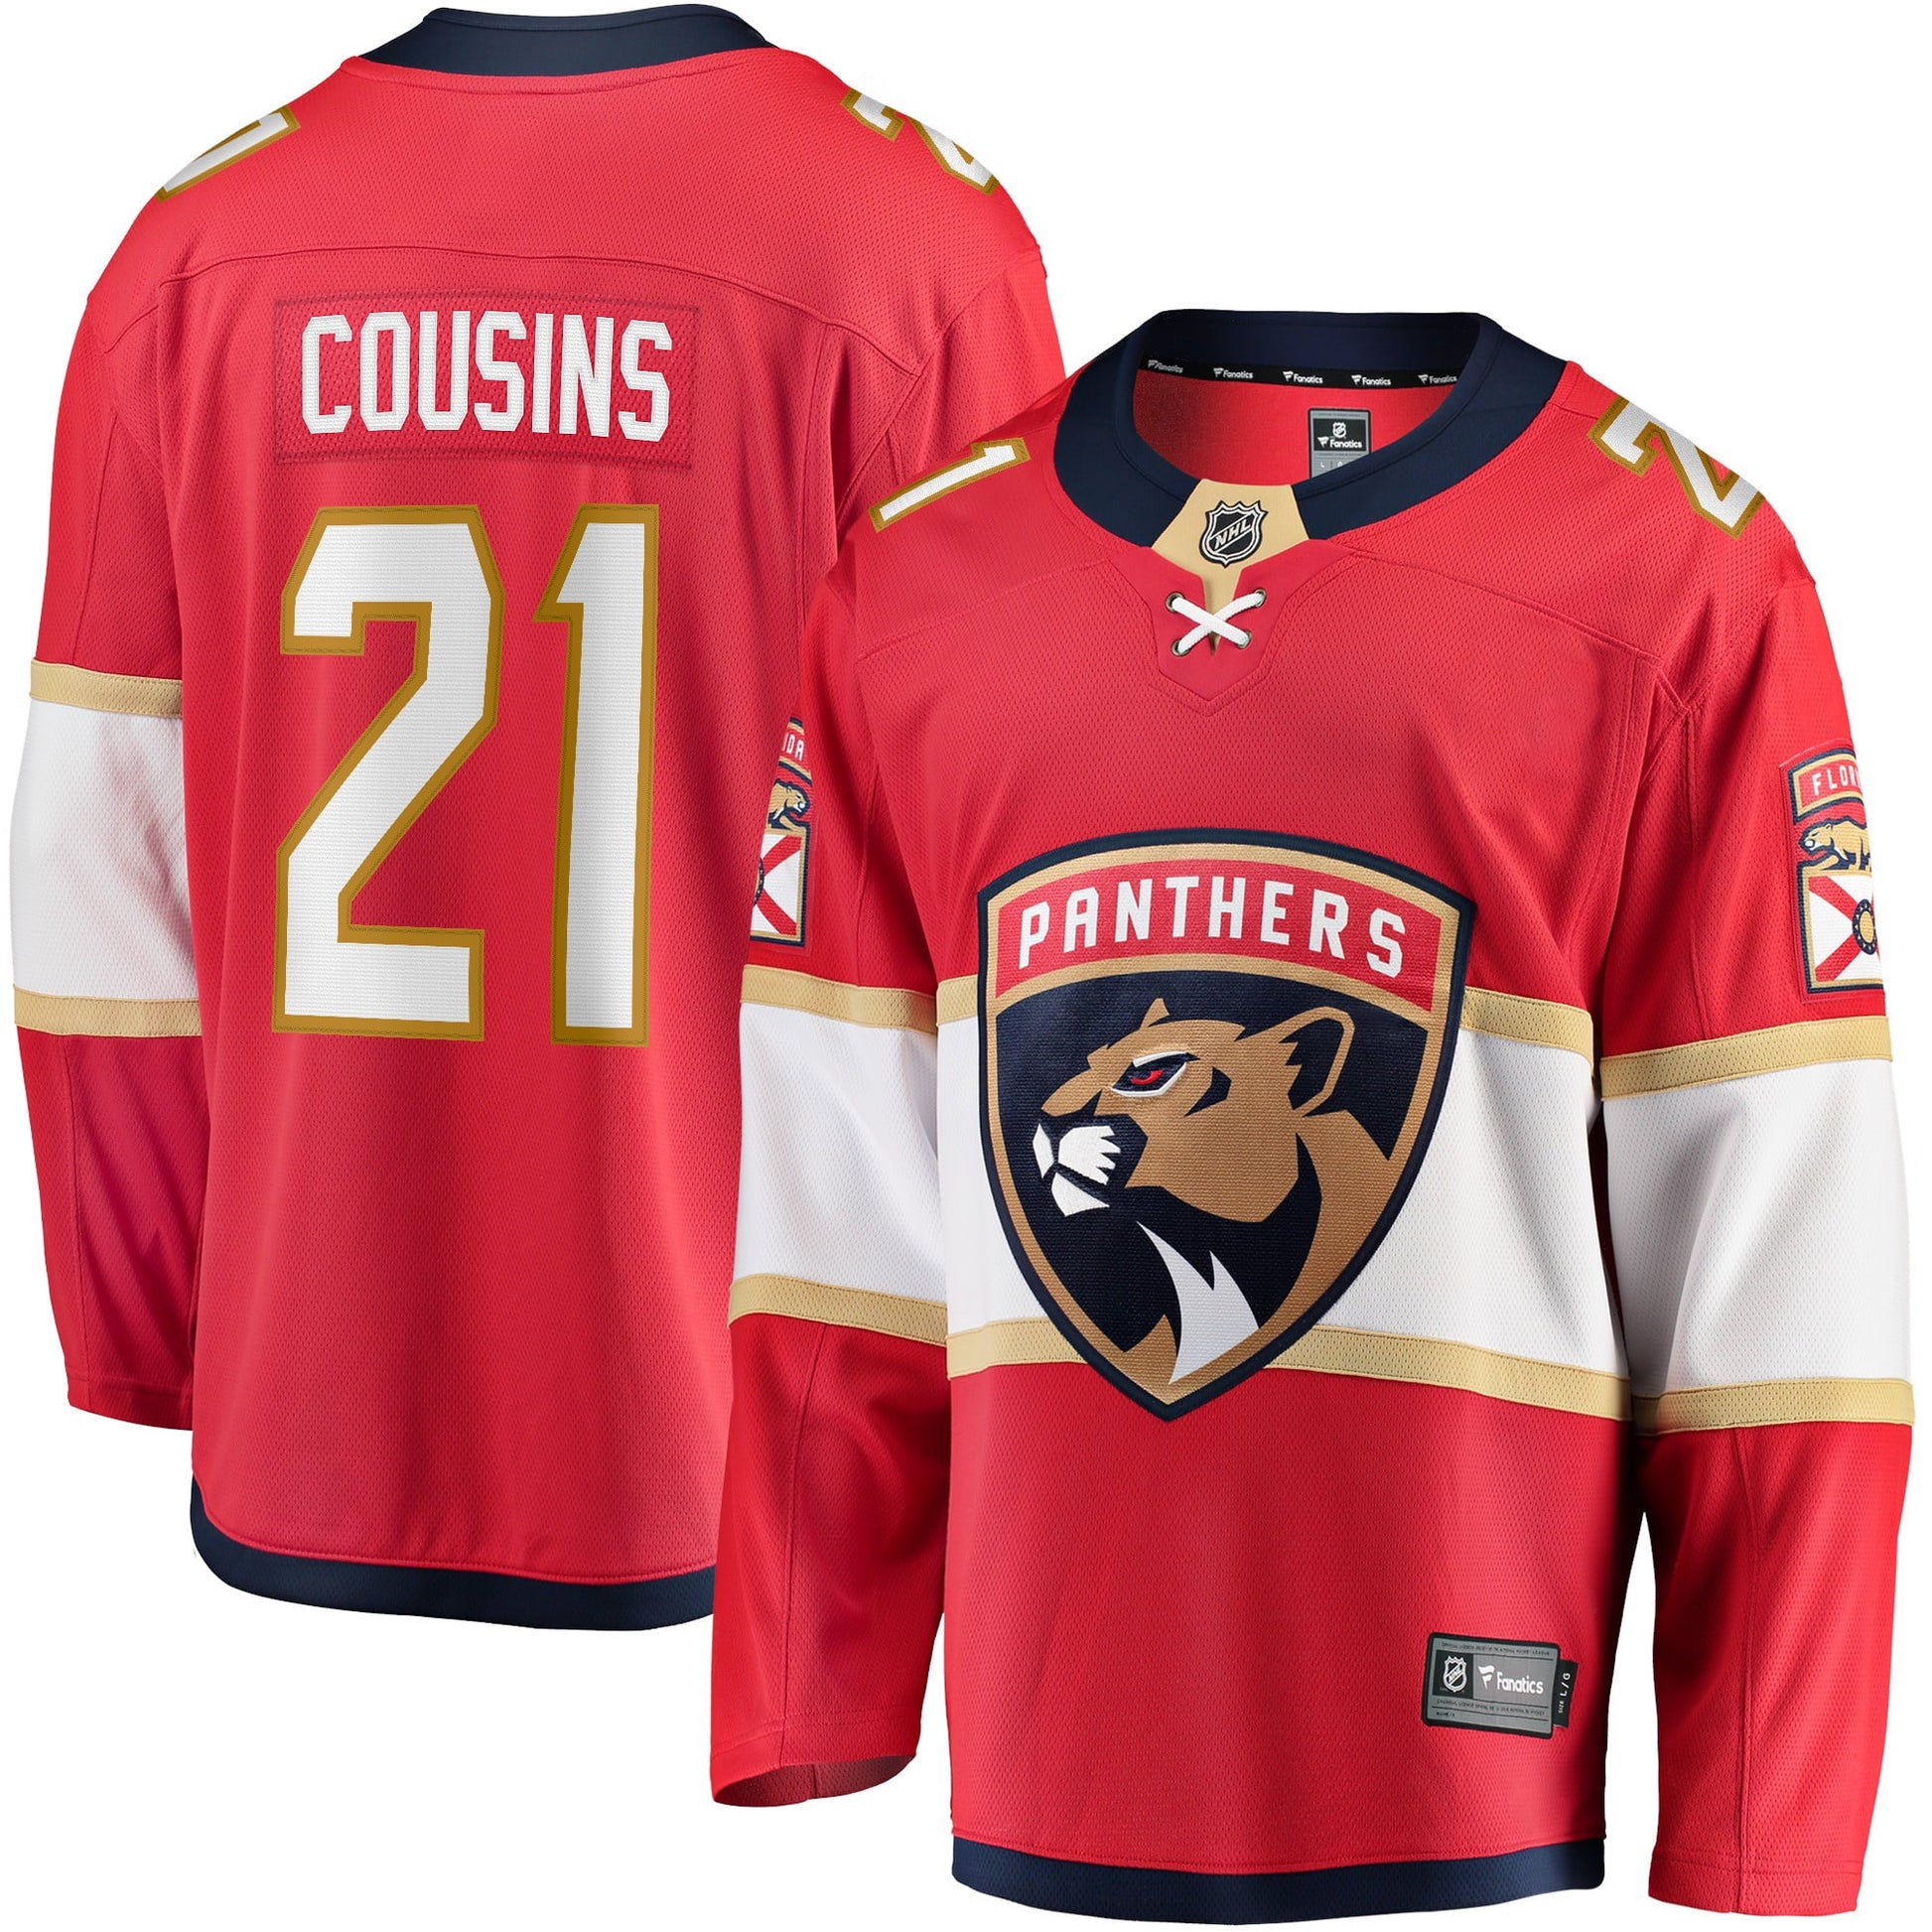 Florida Panthers to have new uniforms